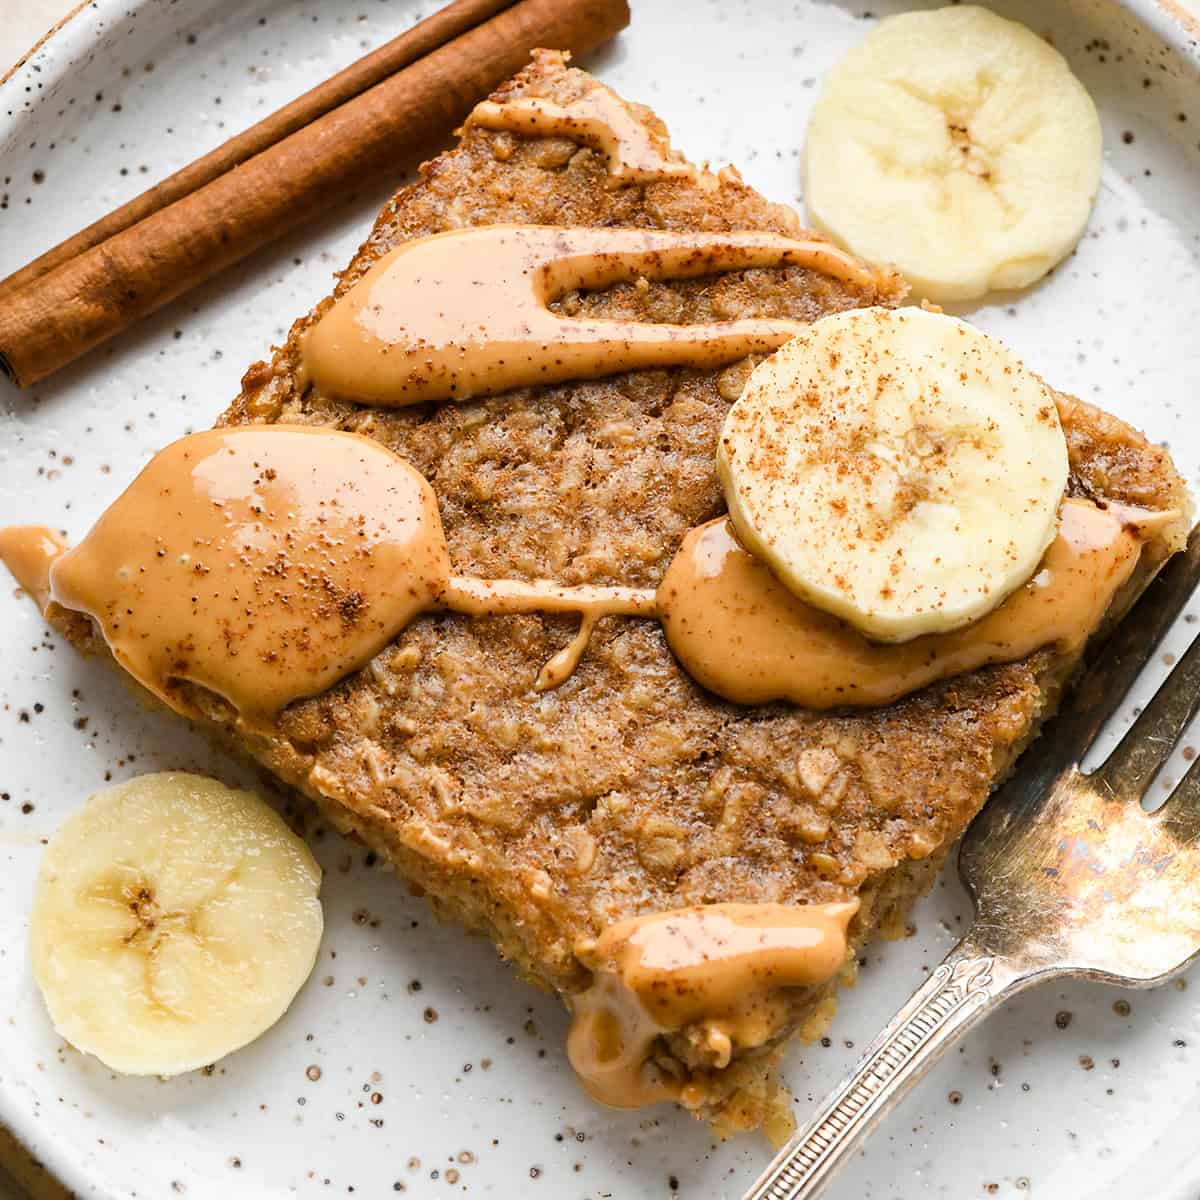 a slice of Peanut Butter Banana Baked Oatmeal on a plate with a drizzle of peanut butter and sliced bananas